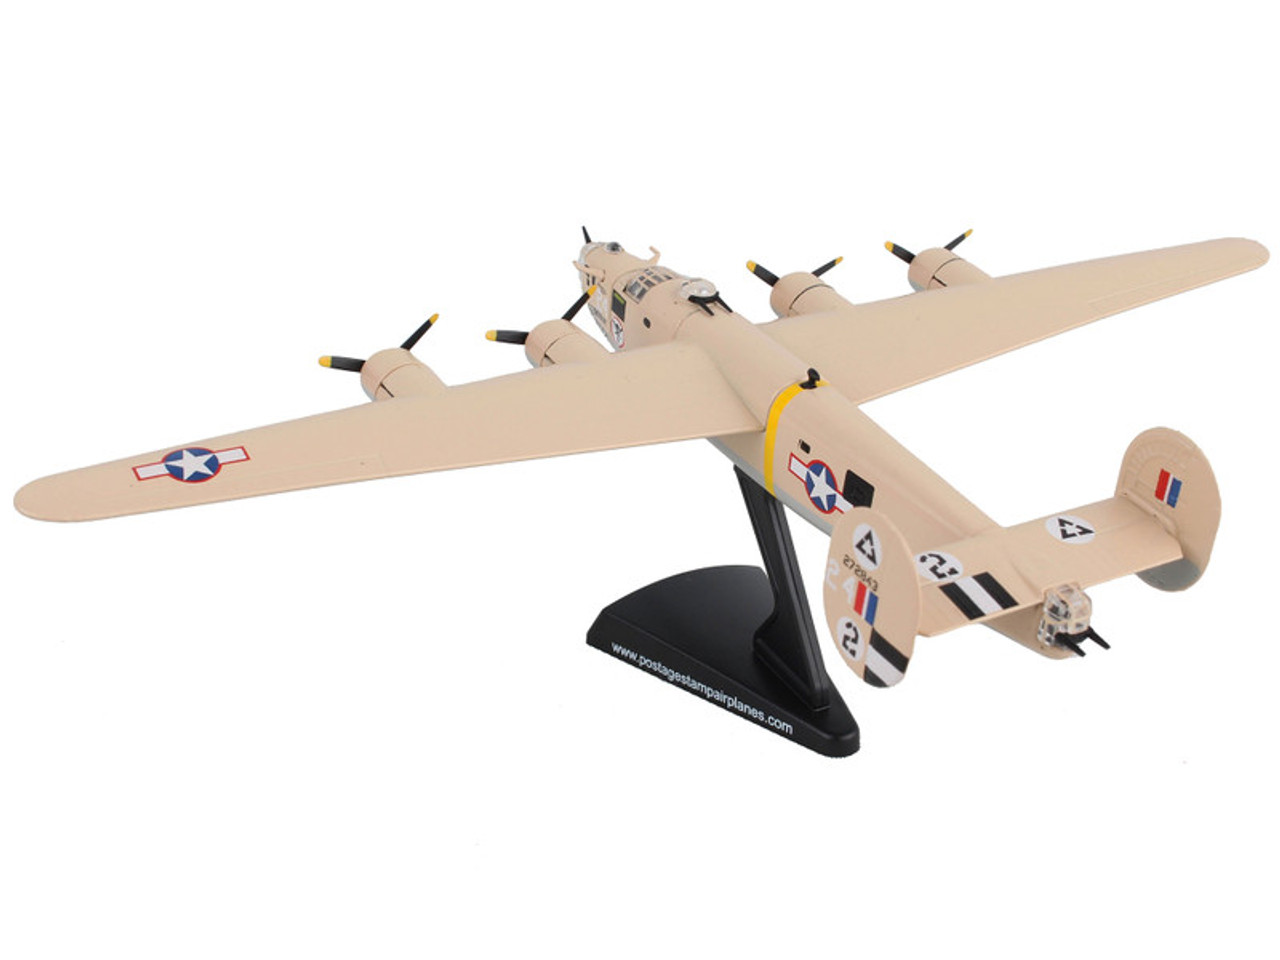 Consolidated B-24D Liberator Bomber Aircraft "Strawberry Bitch 376th Heavy Bombardment North Africa" United States Army Air Forces 1/163 Diecast Model Airplane by Postage Stamp